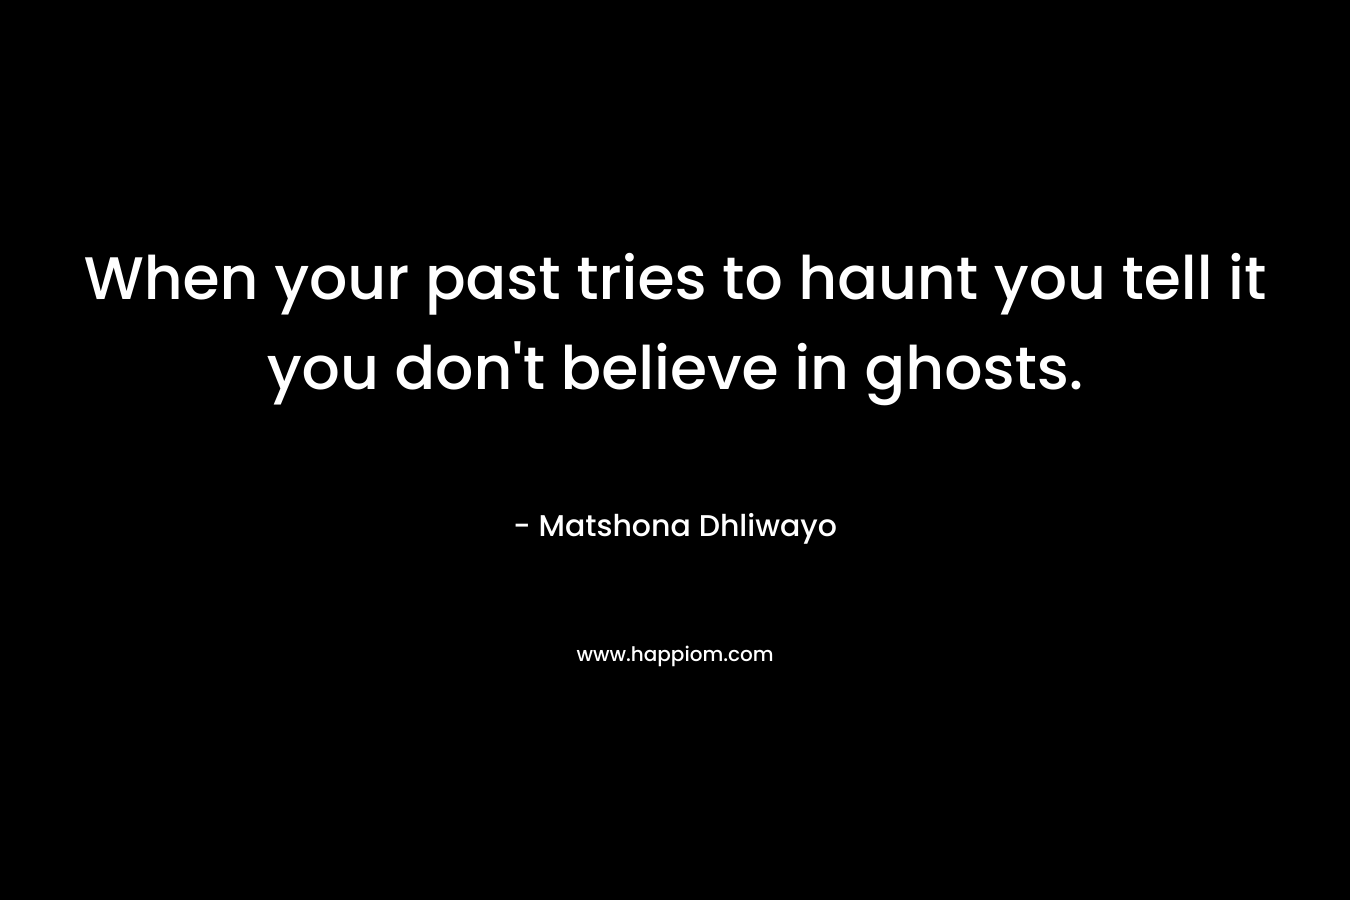 When your past tries to haunt you tell it you don’t believe in ghosts. – Matshona Dhliwayo